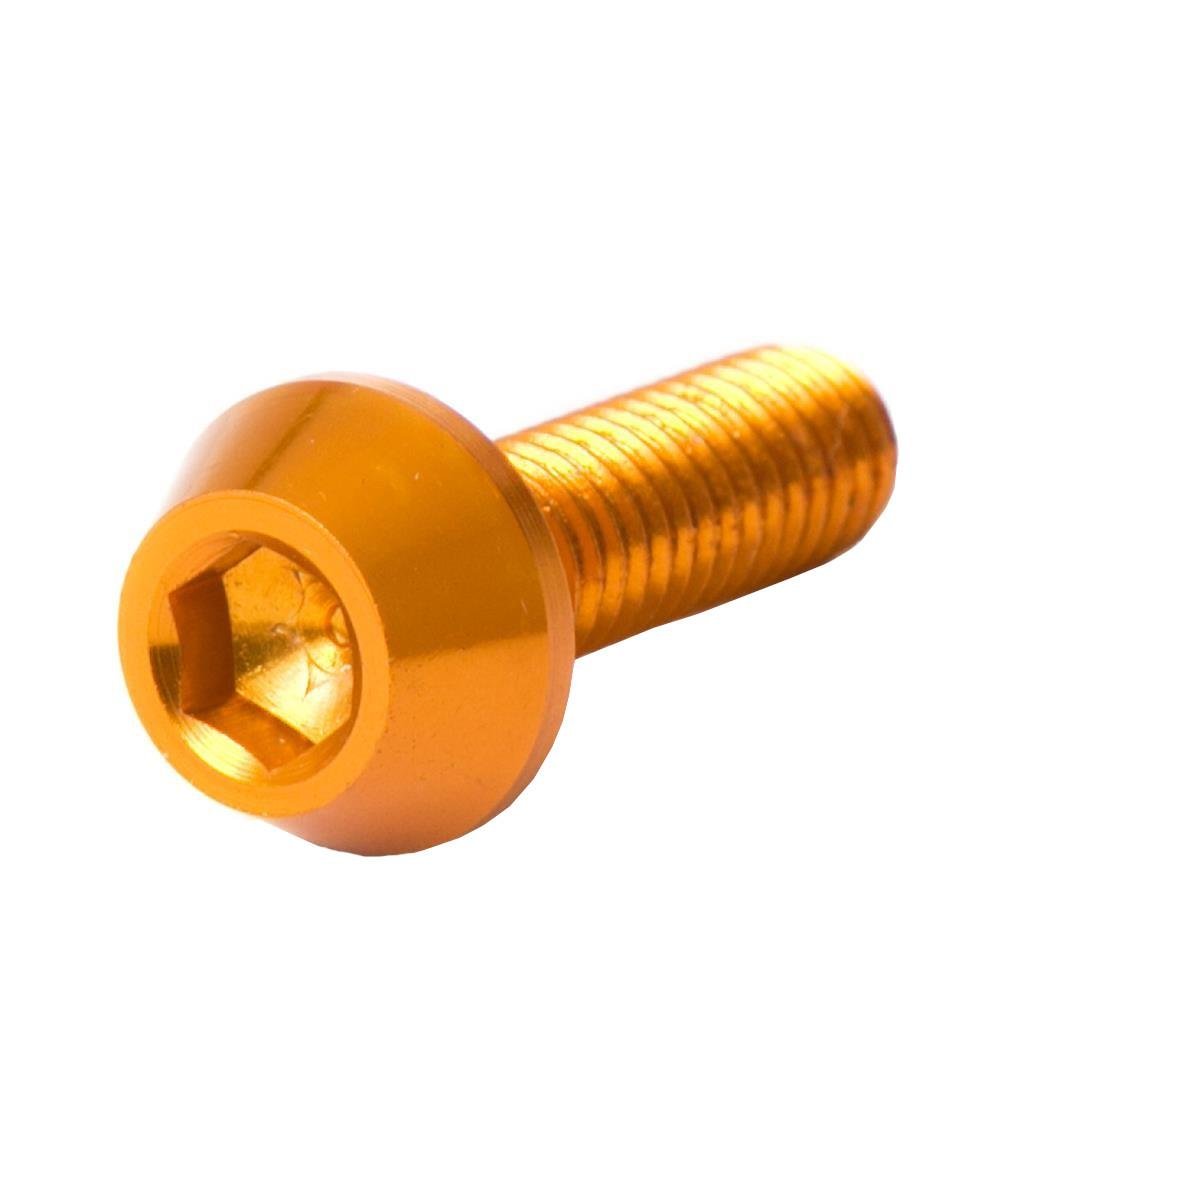 DRC Inner Hex Bolts  M6 x 16 mm, Gold, Pack of 20